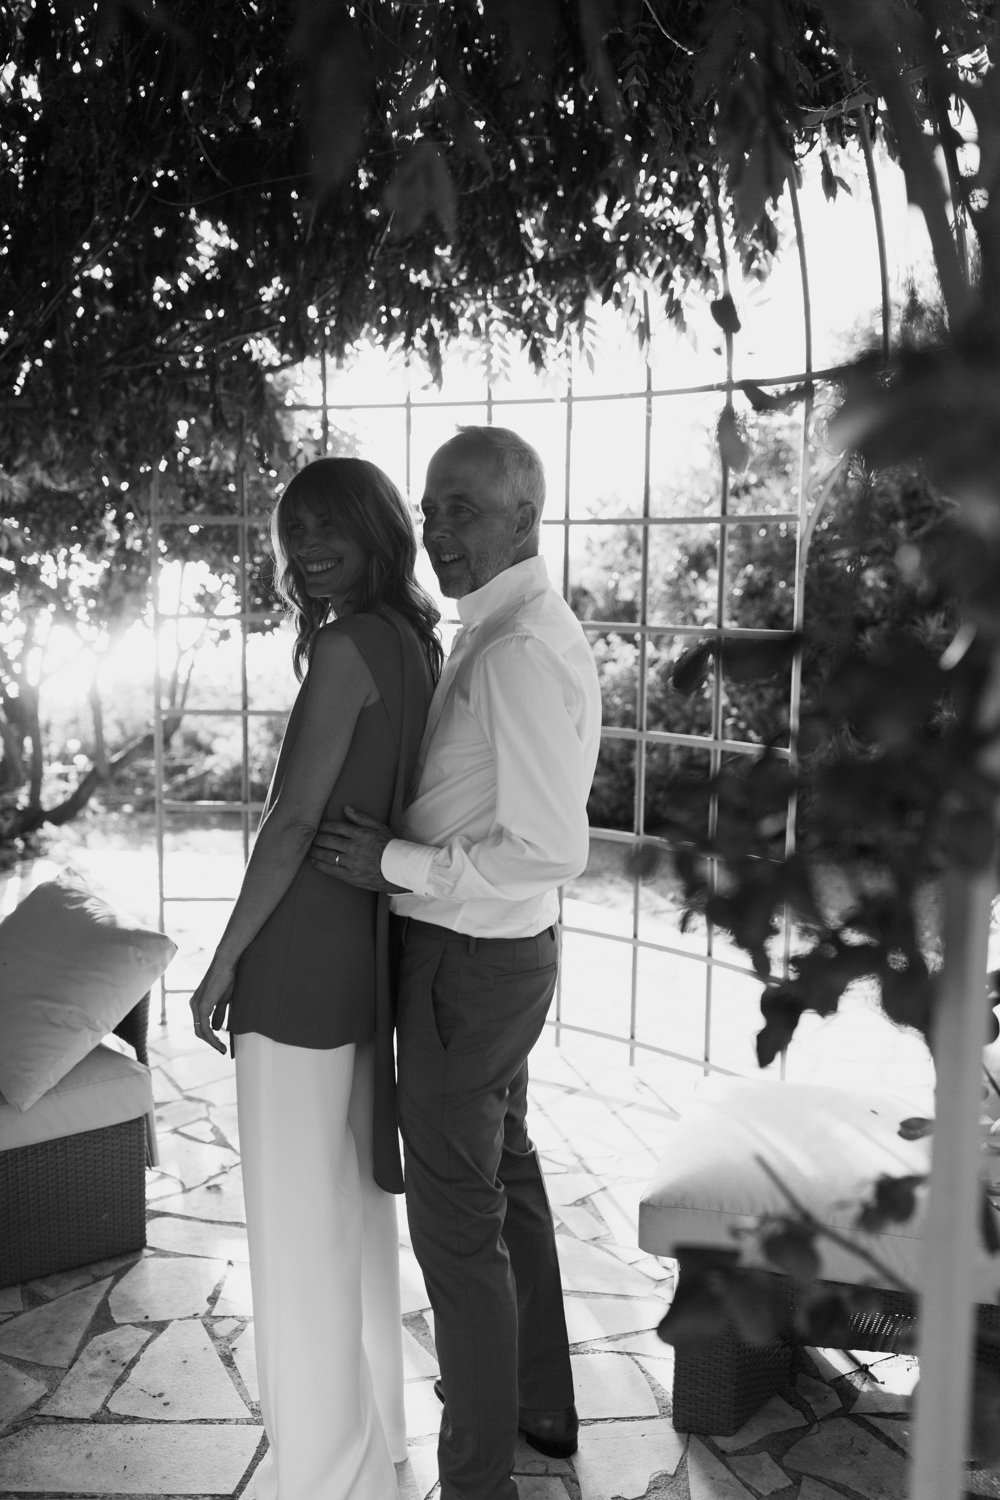 wedding marriage mariage photographe corse corsica ajaccio Krista Espino Anza Creative family photography mairee maire courthouse france french le maquis hotel-92.jpg